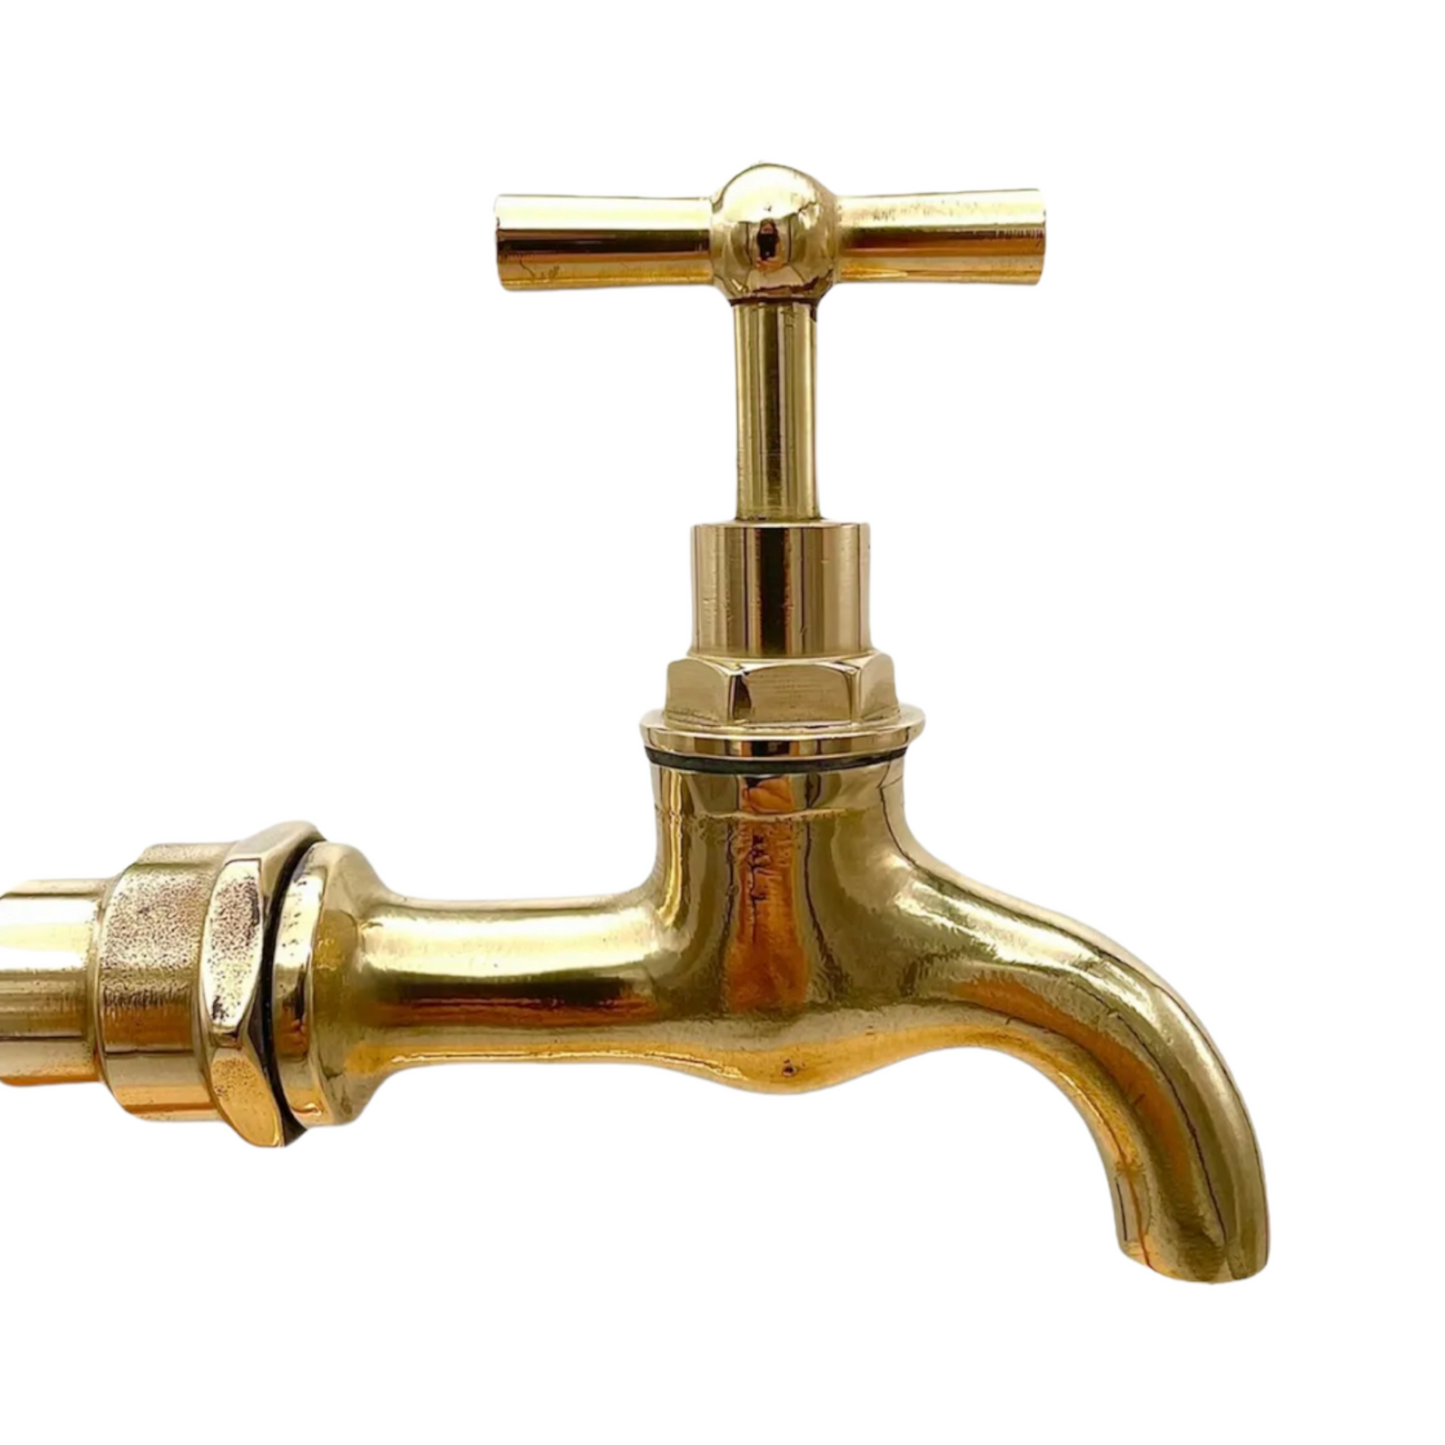 brass tap head for Pair of copper and brass vintage style kitchen taps sold by All Things French Store